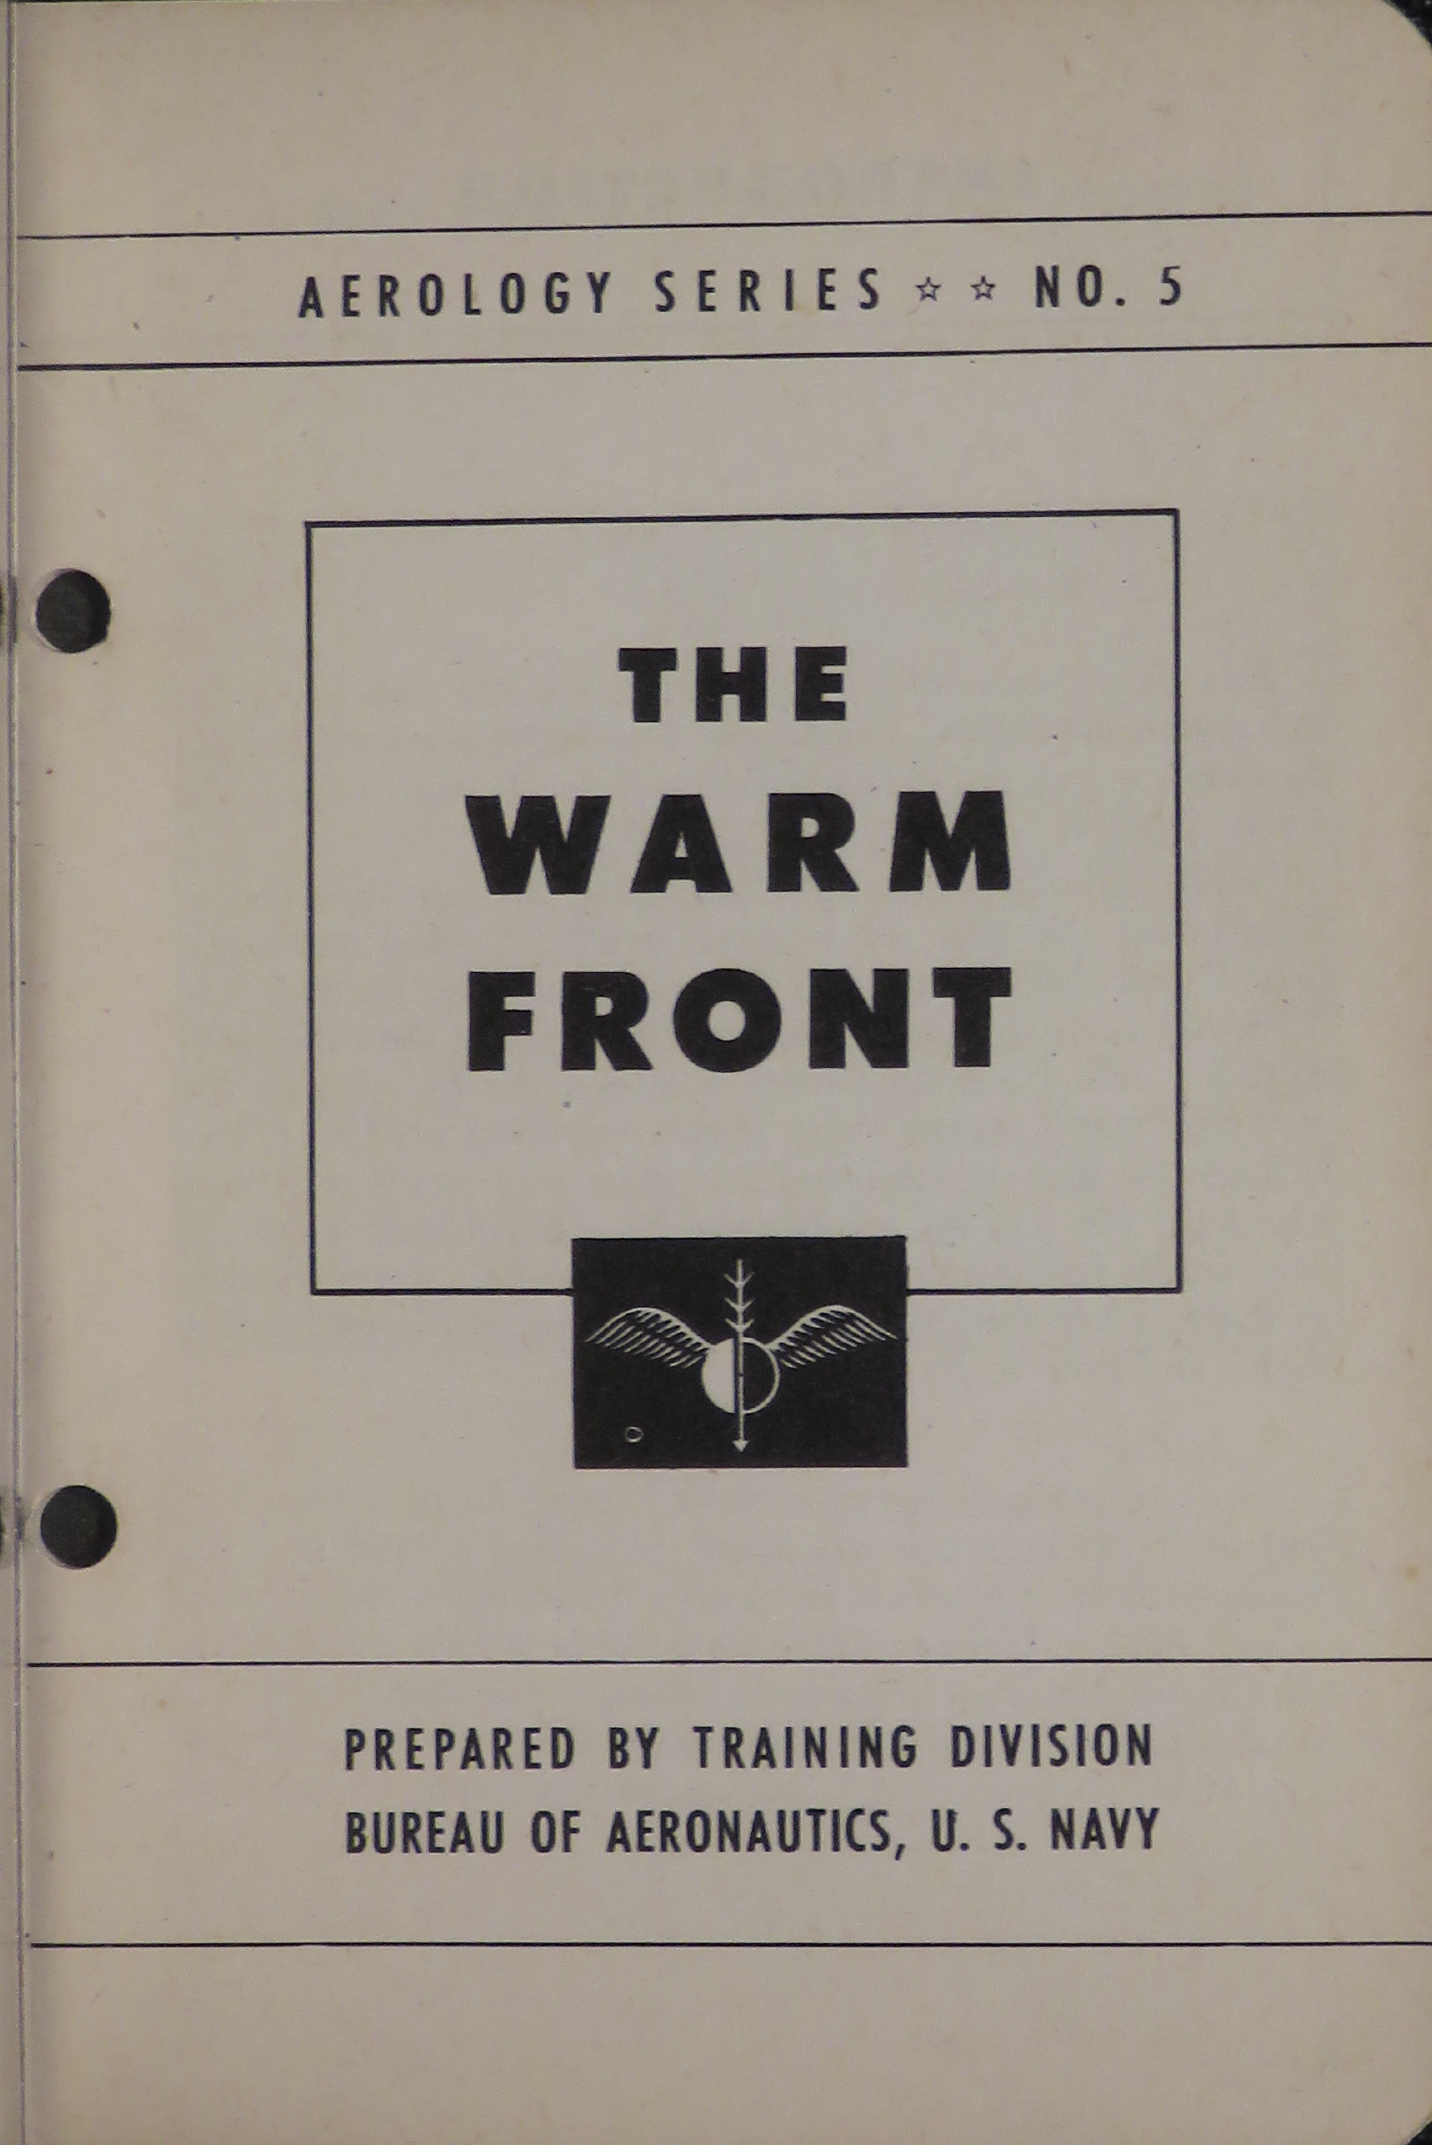 Sample page 3 from AirCorps Library document: Aerology Series No. 5; The Warm Front